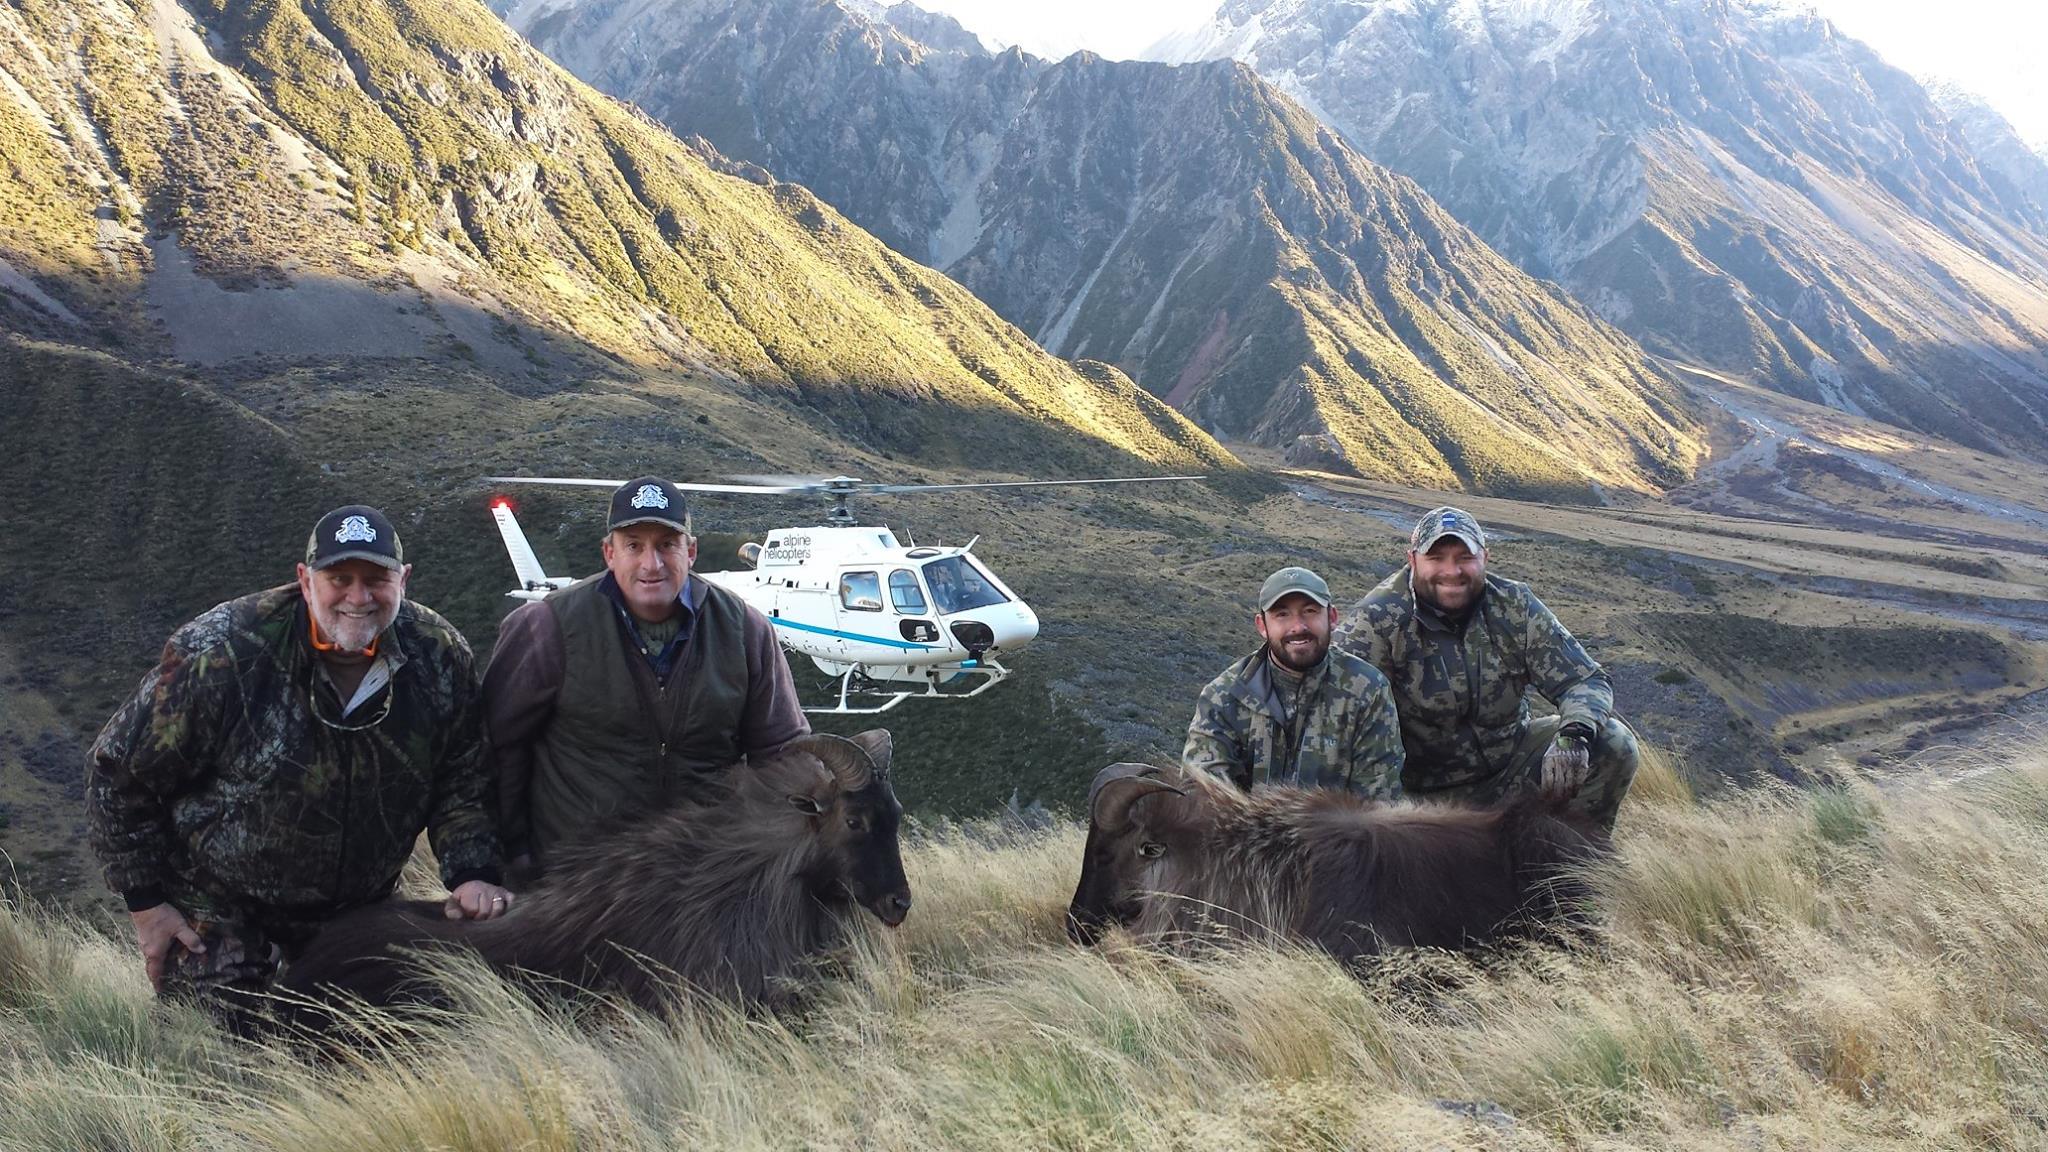 2019 Red Stag, Tahr, & Chamois | New Zealand | ONLY 2 SPOTS LEFT!